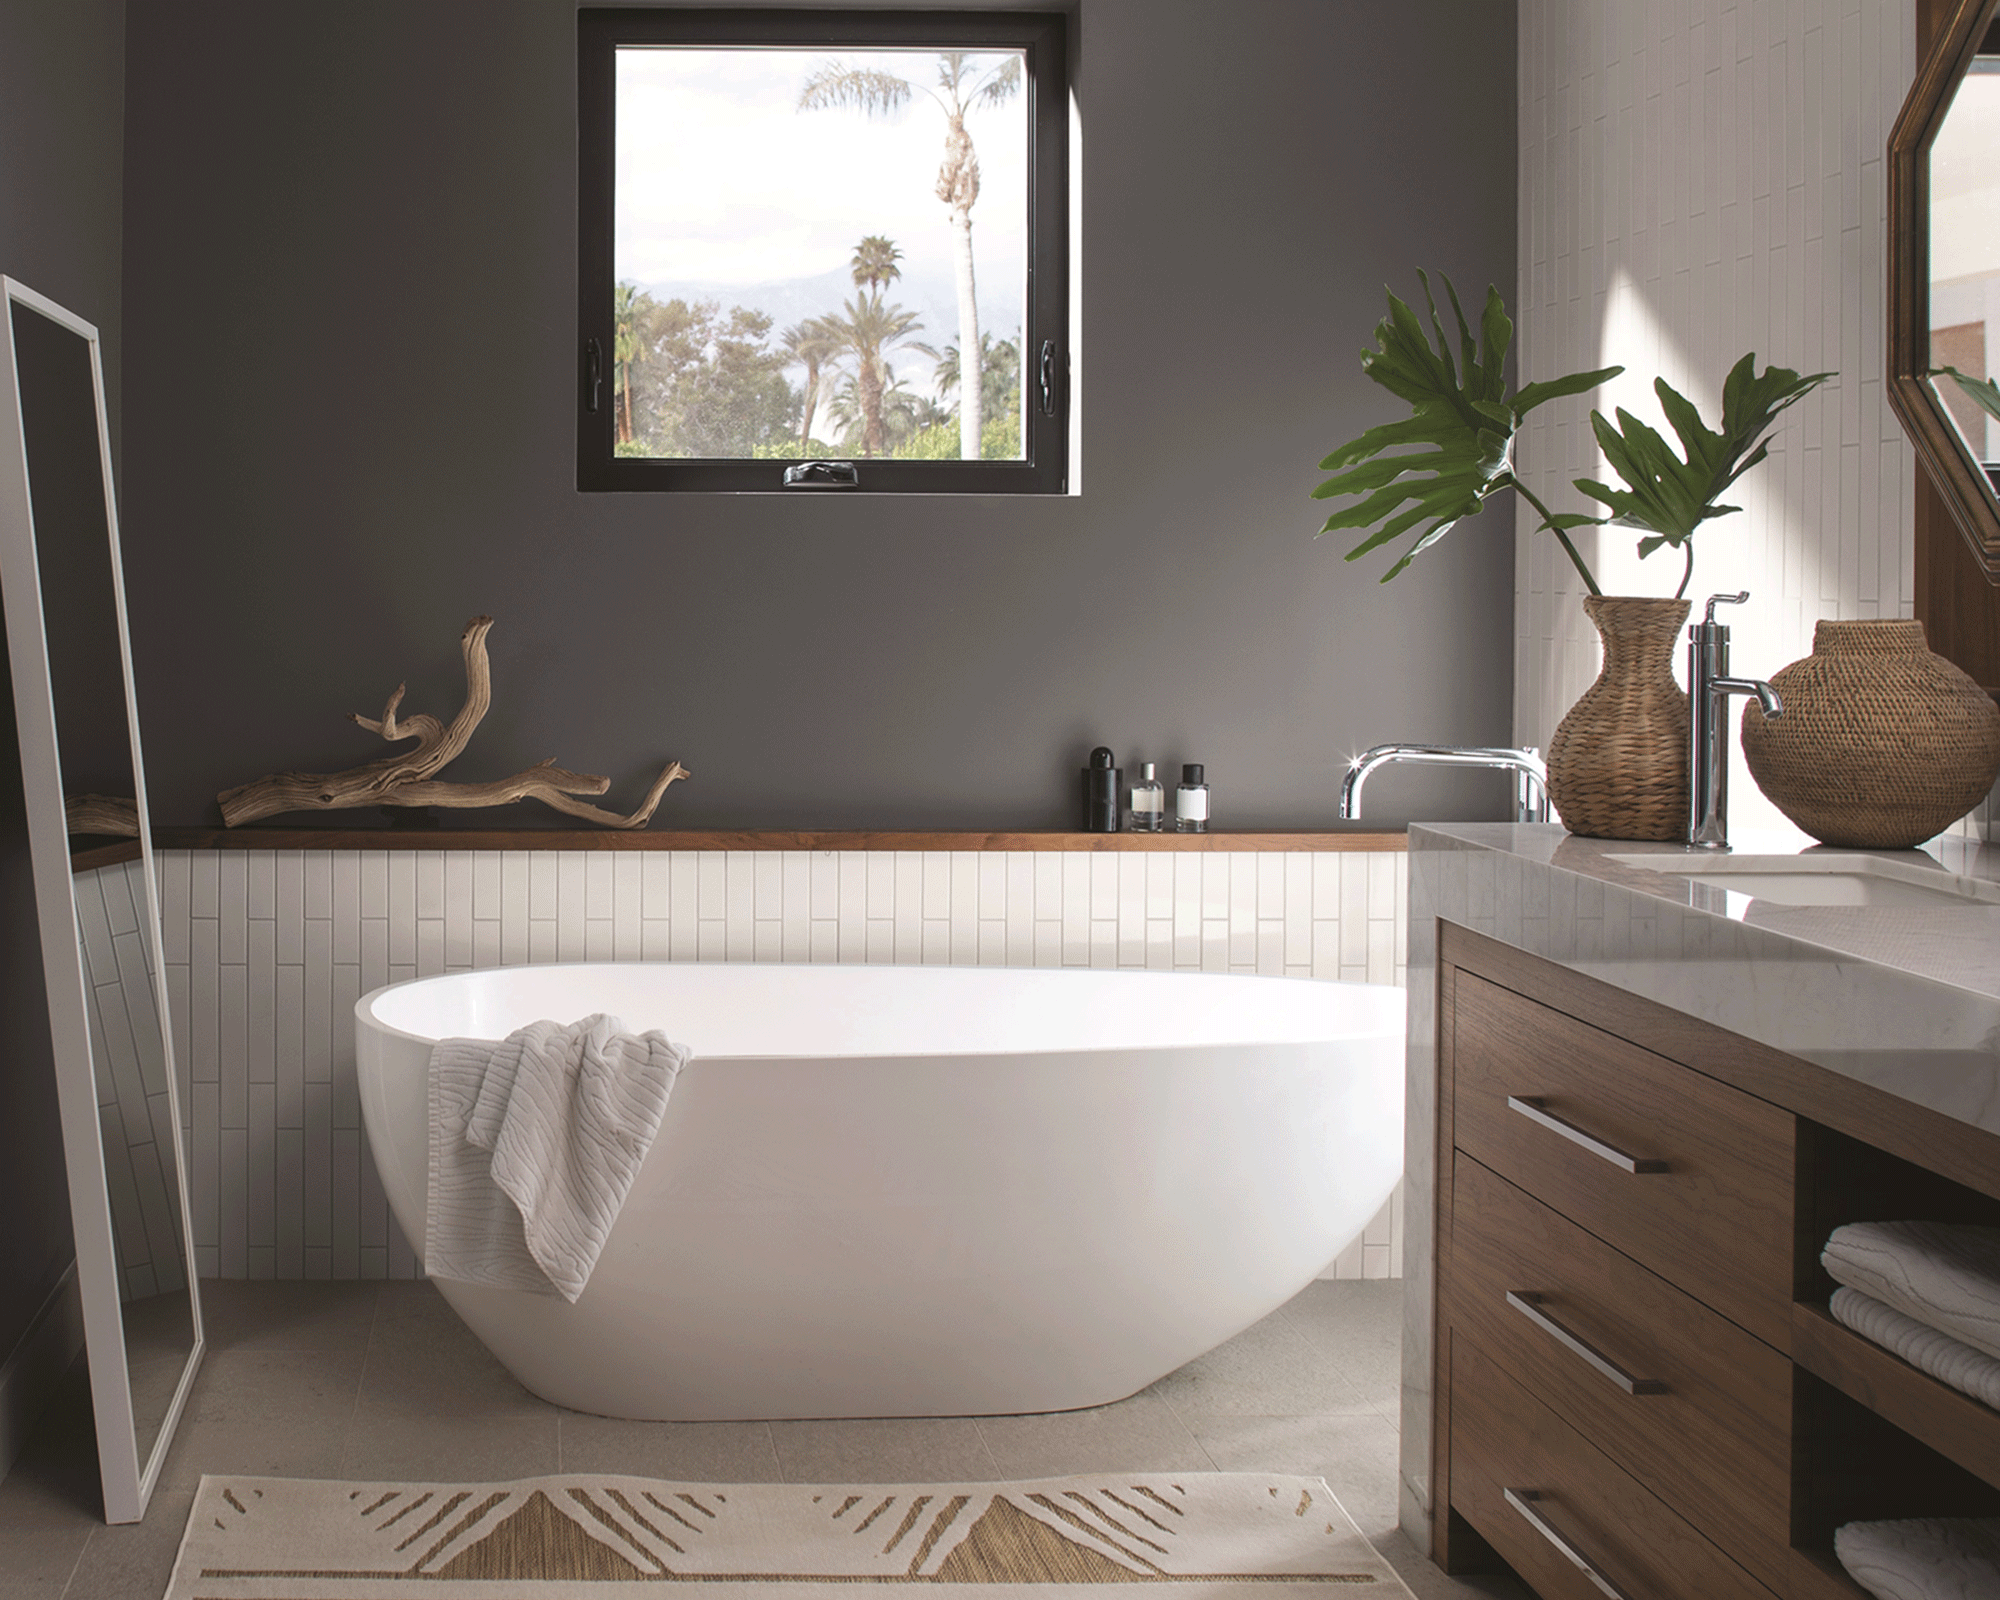 A small white bathtub in bathroom with white metro tiling, dark grey wall decor and wooden vanity